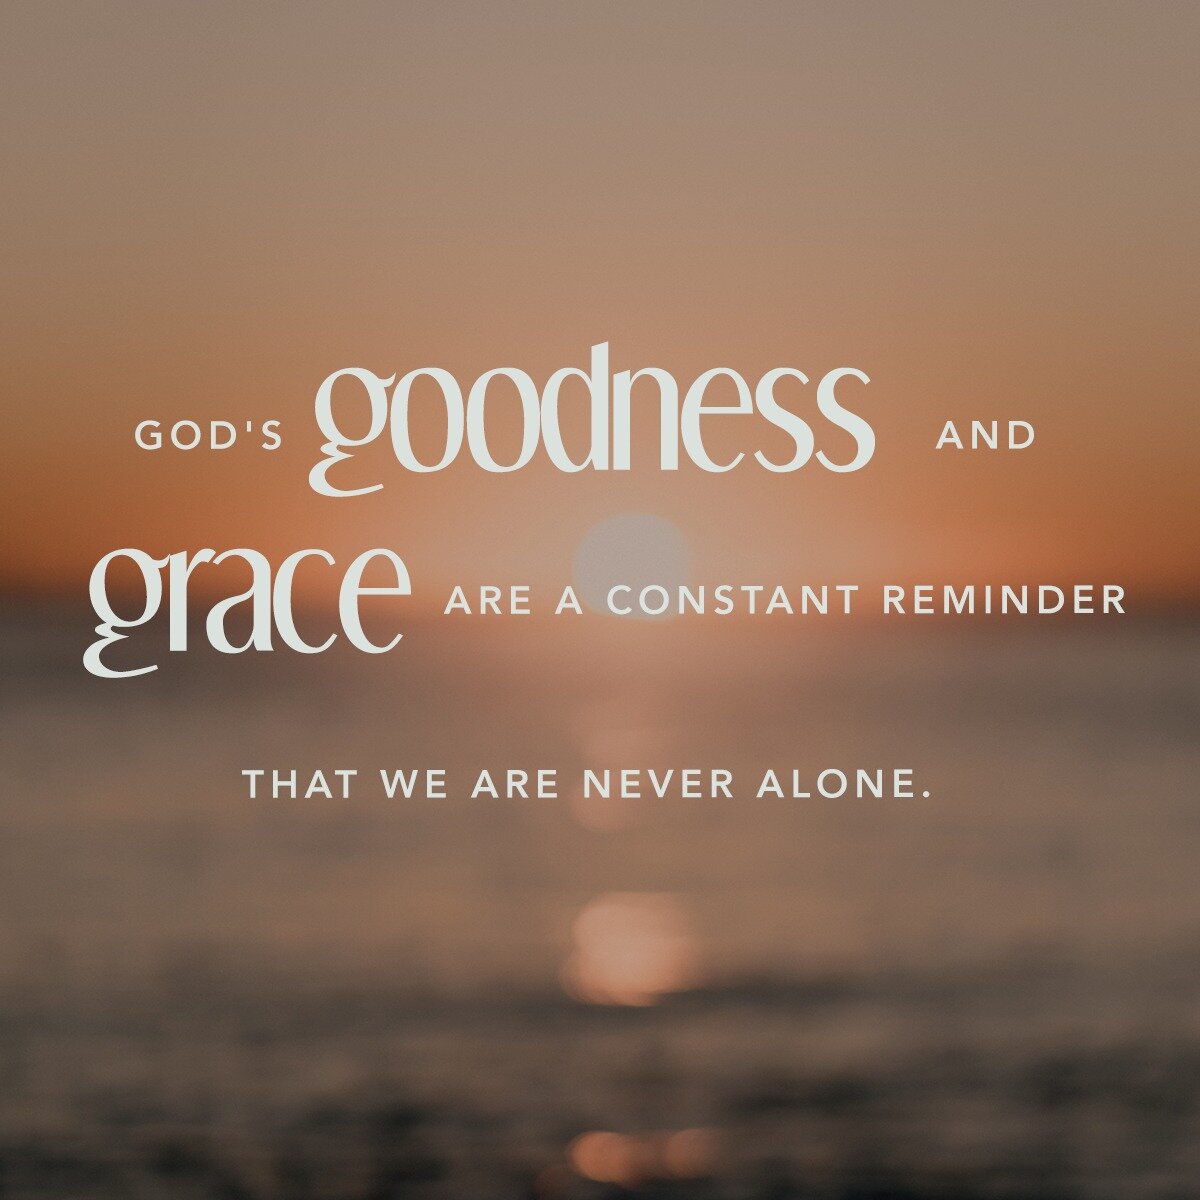 It is the Lord who goes before you. He will be with you; he will not leave you or forsake you. Do not fear or be dismayed&rdquo; (Deut. 31:8). 

God's goodness and grace are a constant reminder that we are never alone. 

His blessings are infinite, a